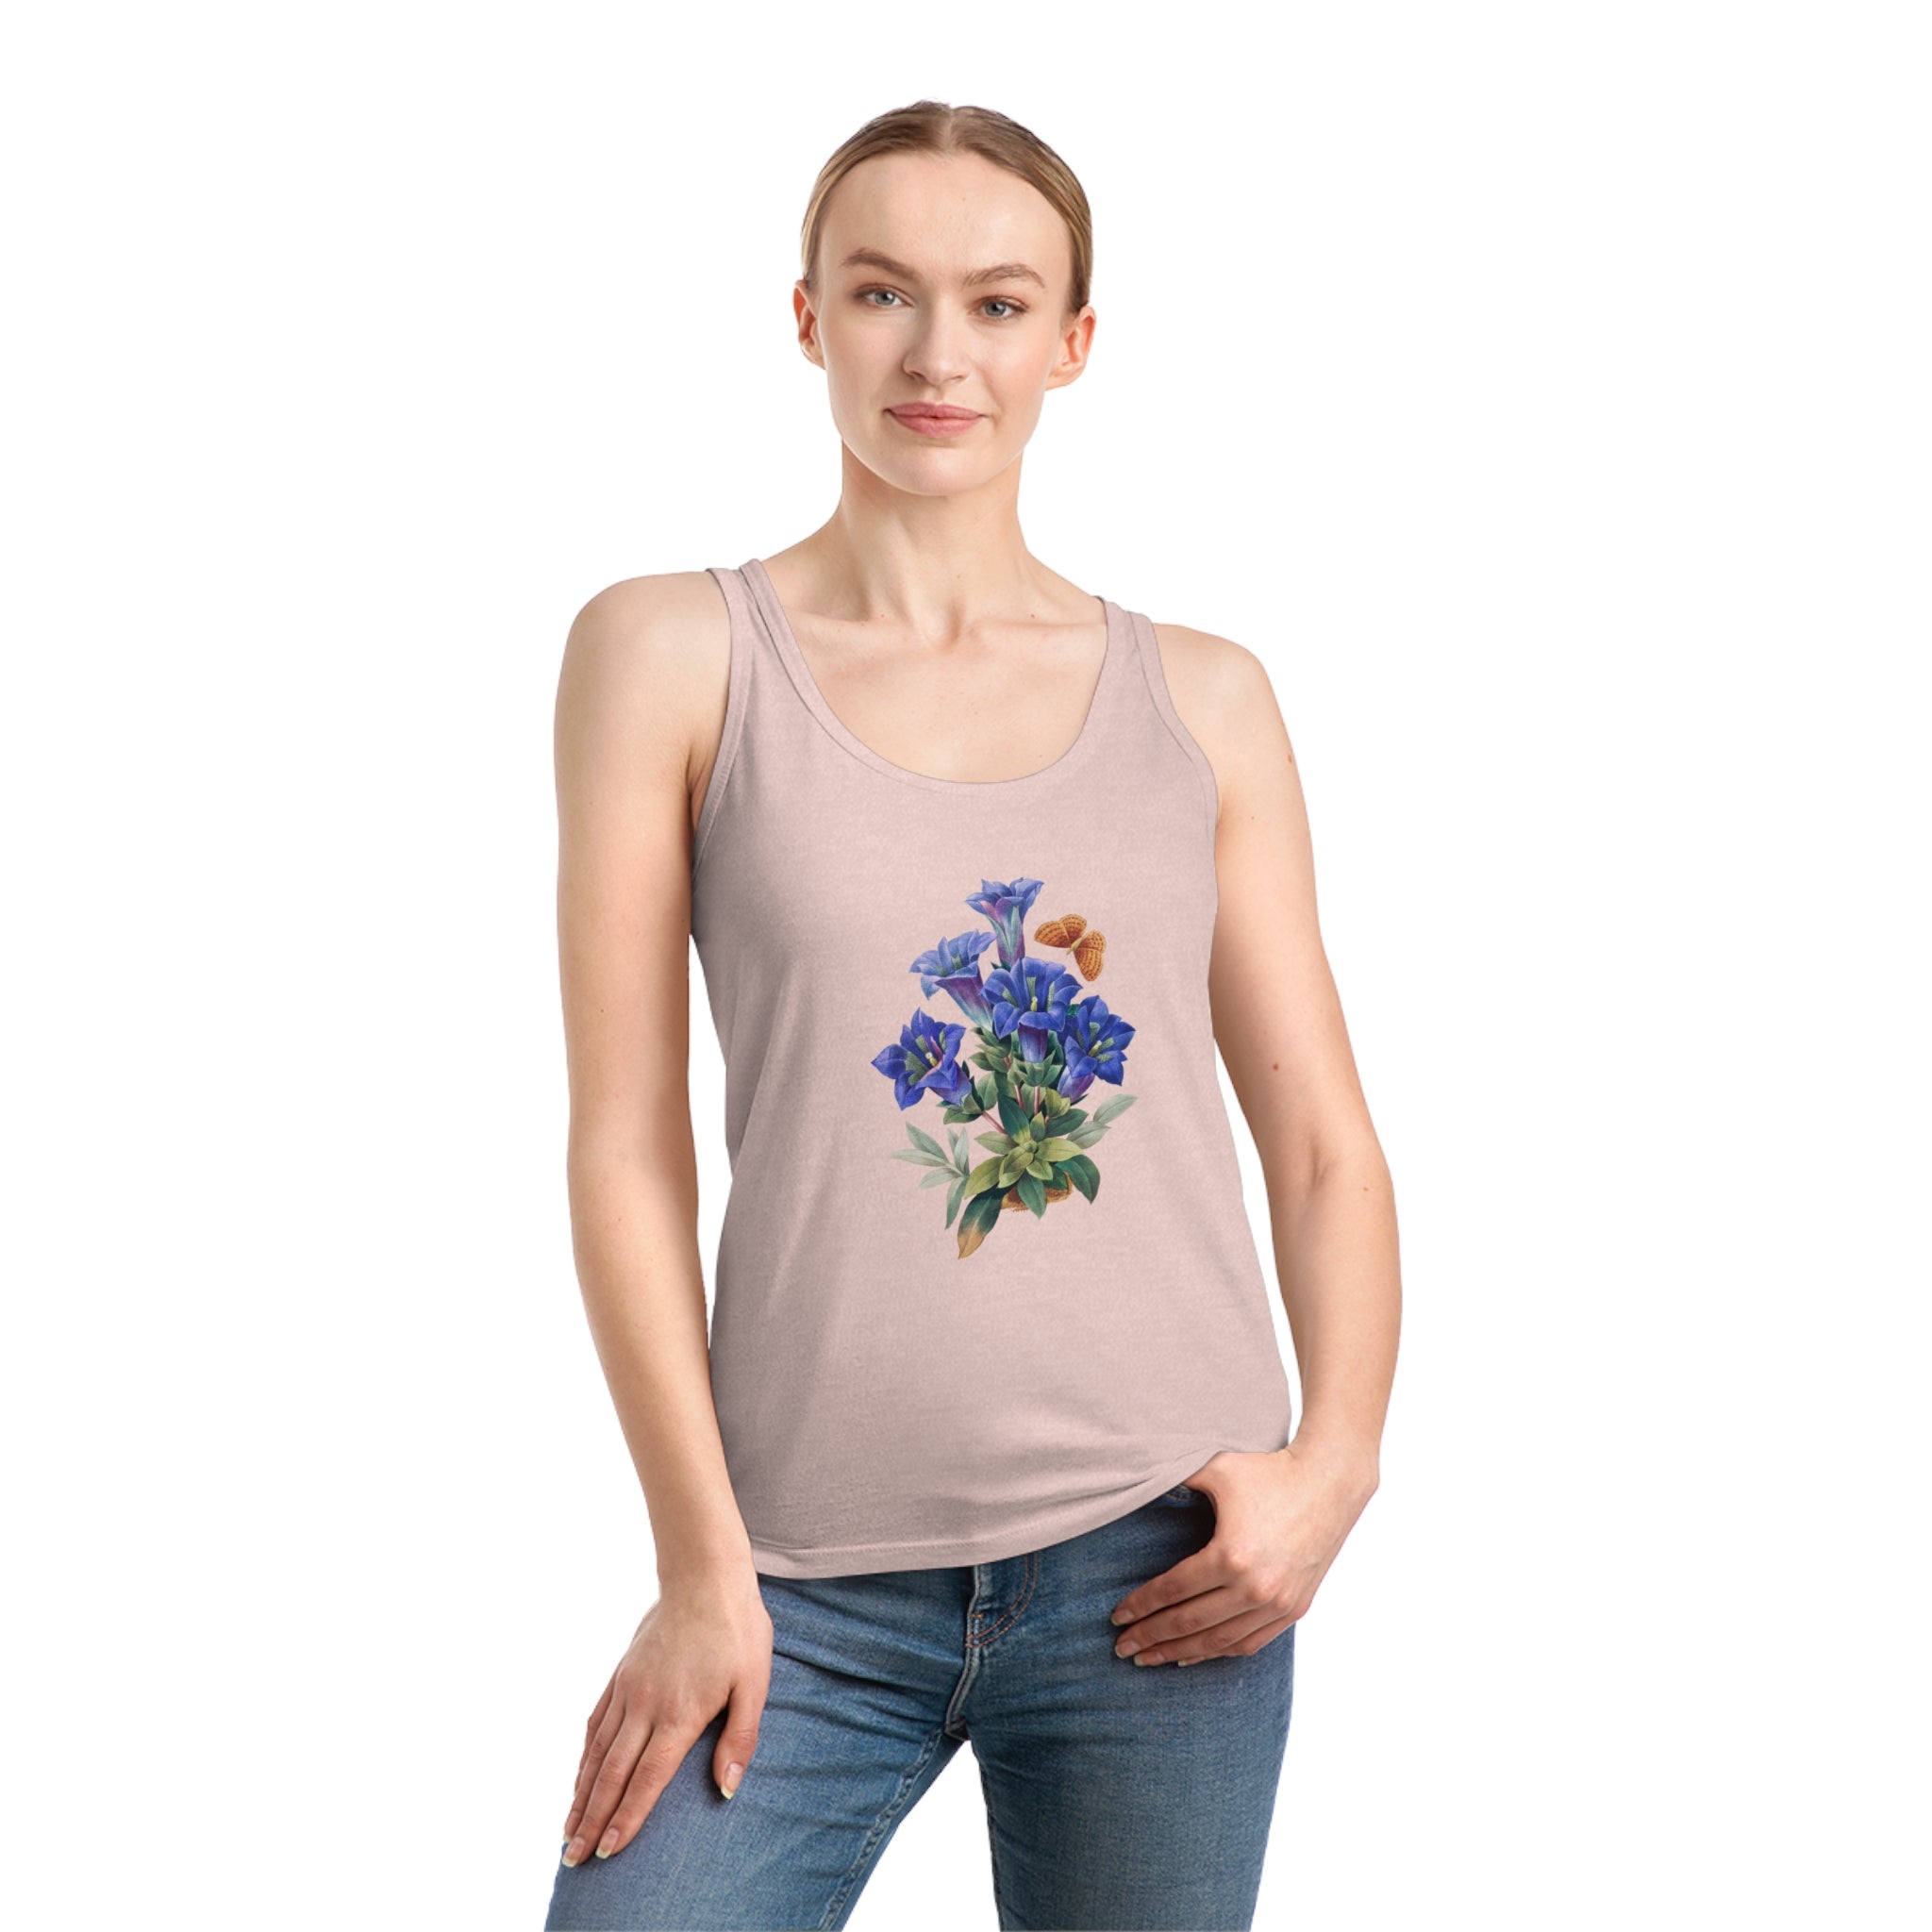 A Bouquet Tank Top with a bouquet of blue flowers, perfect for any occasion.